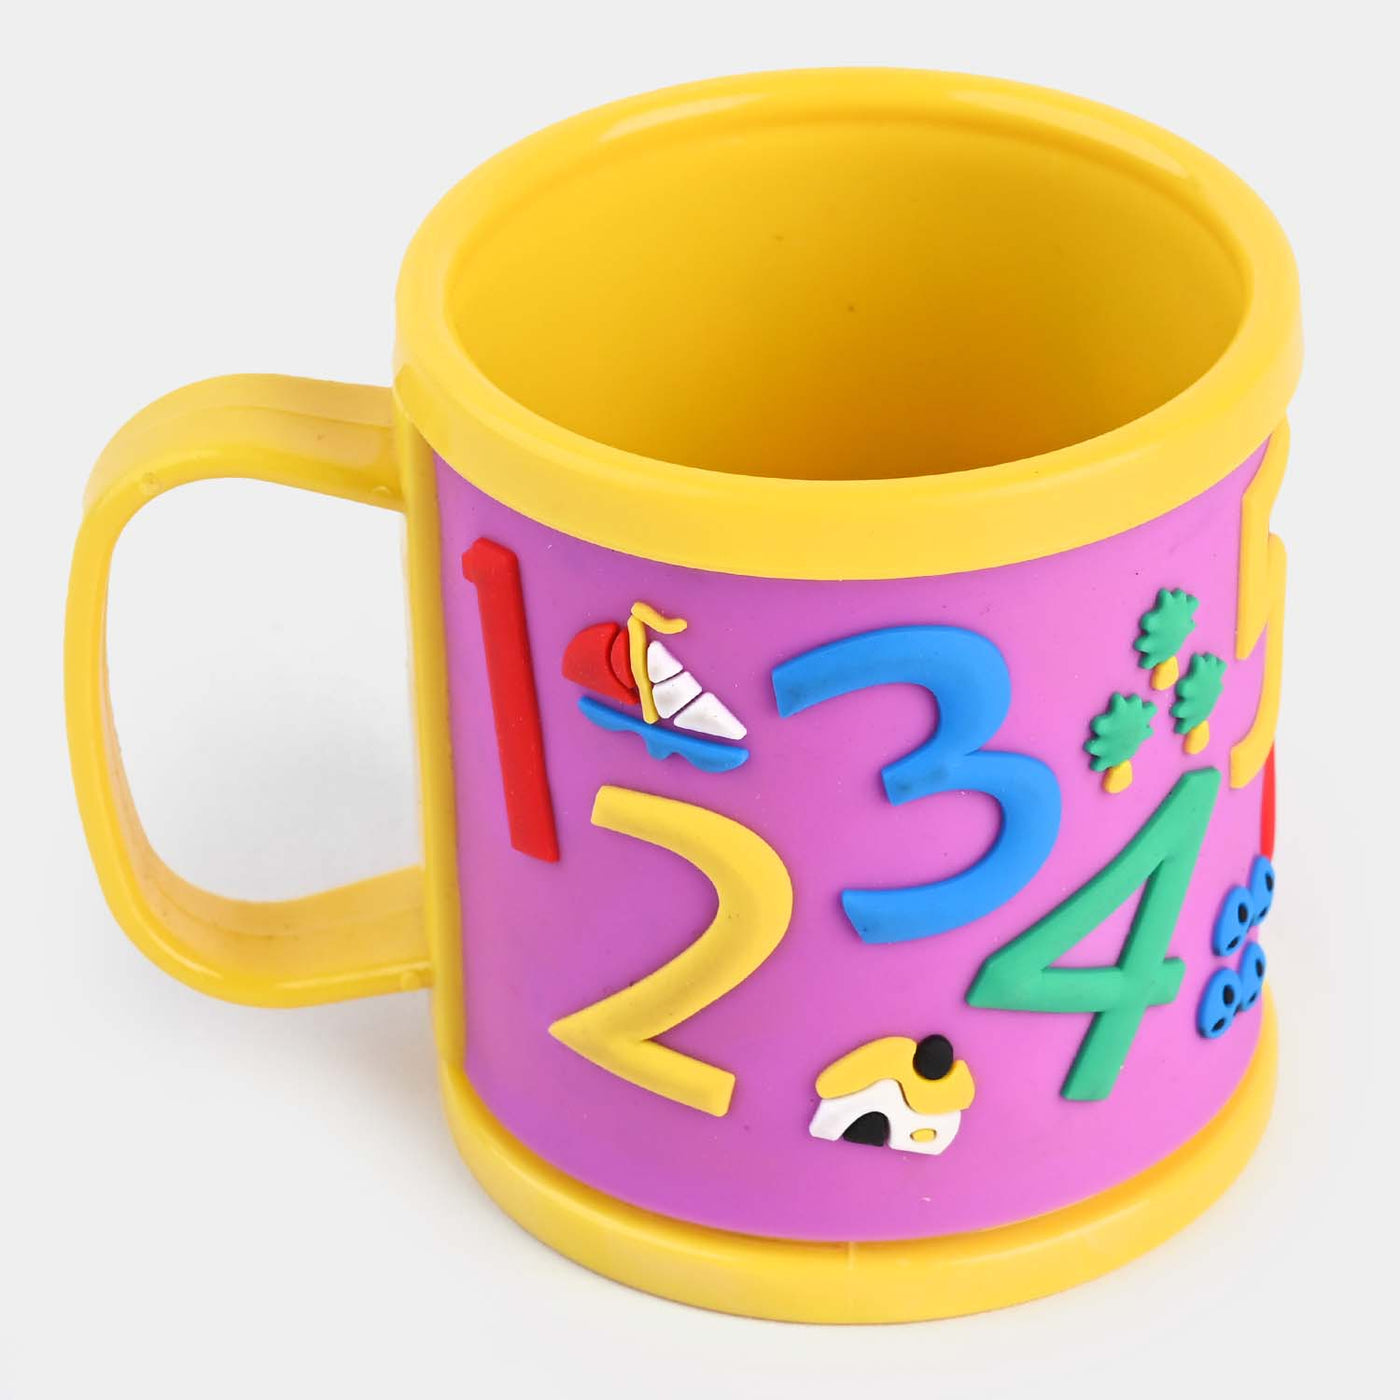 3D DRINKING MUG/CUP FOR KIDS